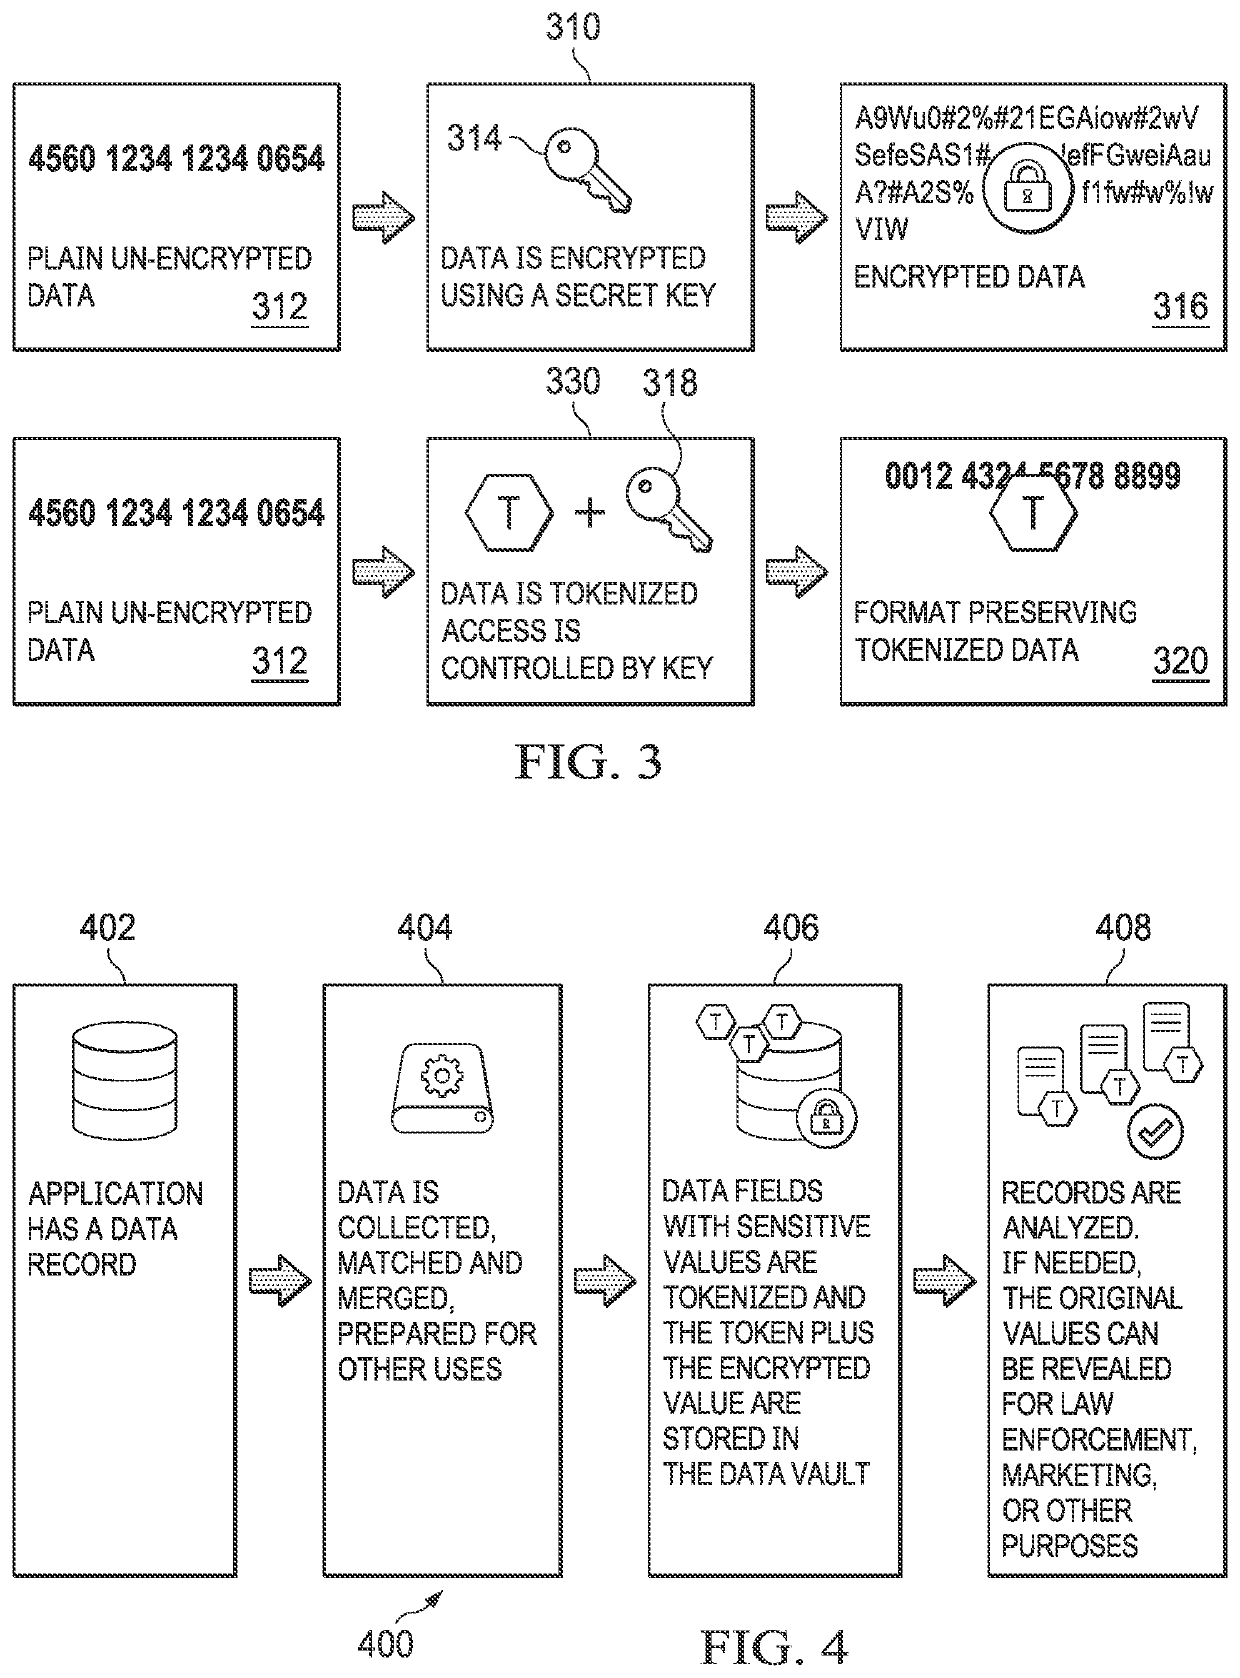 Token-based data security systems and methods with embeddable markers in unstructured data